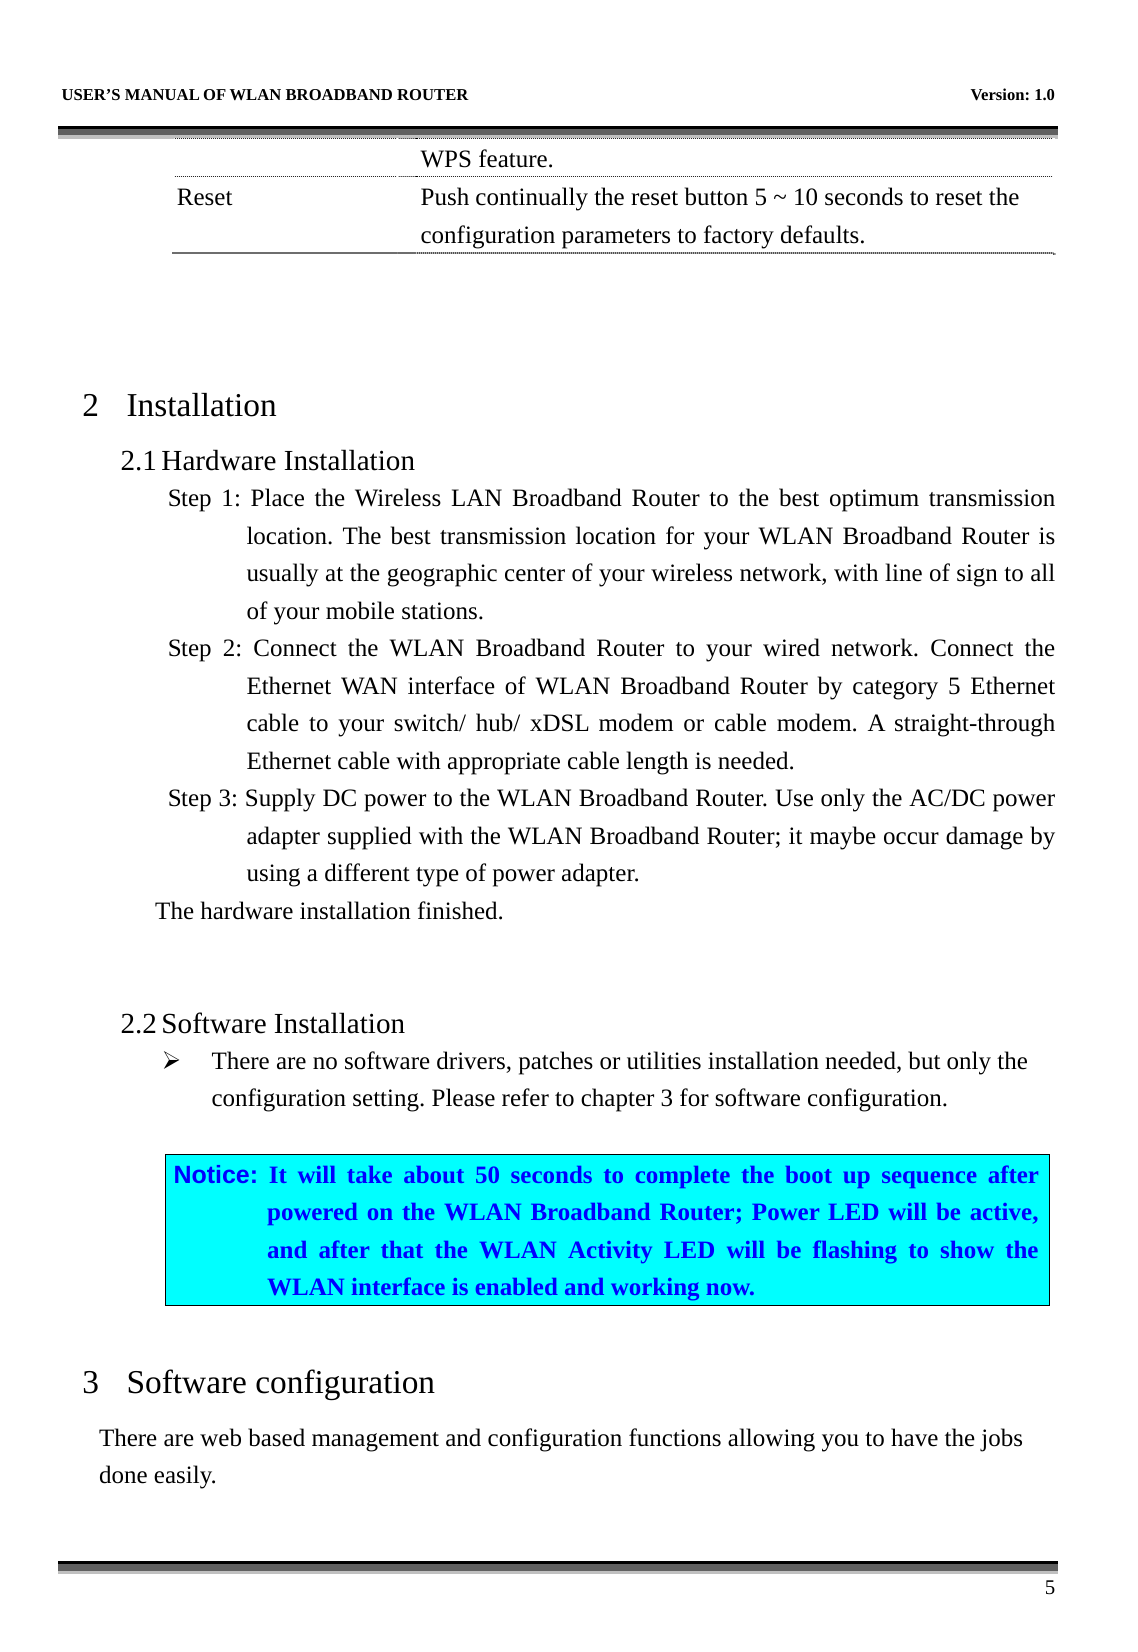   USER’S MANUAL OF WLAN BROADBAND ROUTER    Version: 1.0      5 WPS feature. Reset    Push continually the reset button 5 ~ 10 seconds to reset the configuration parameters to factory defaults.    2 Installation 2.1 Hardware Installation Step 1: Place the Wireless LAN Broadband Router to the best optimum transmission location. The best transmission location for your WLAN Broadband Router is usually at the geographic center of your wireless network, with line of sign to all of your mobile stations. Step 2: Connect the WLAN Broadband Router to your wired network. Connect the Ethernet WAN interface of WLAN Broadband Router by category 5 Ethernet cable to your switch/ hub/ xDSL modem or cable modem. A straight-through Ethernet cable with appropriate cable length is needed. Step 3: Supply DC power to the WLAN Broadband Router. Use only the AC/DC power adapter supplied with the WLAN Broadband Router; it maybe occur damage by using a different type of power adapter. The hardware installation finished.     2.2 Software Installation ¾ There are no software drivers, patches or utilities installation needed, but only the configuration setting. Please refer to chapter 3 for software configuration.  Notice: It will take about 50 seconds to complete the boot up sequence after powered on the WLAN Broadband Router; Power LED will be active, and after that the WLAN Activity LED will be flashing to show the WLAN interface is enabled and working now.  3 Software configuration There are web based management and configuration functions allowing you to have the jobs done easily.  